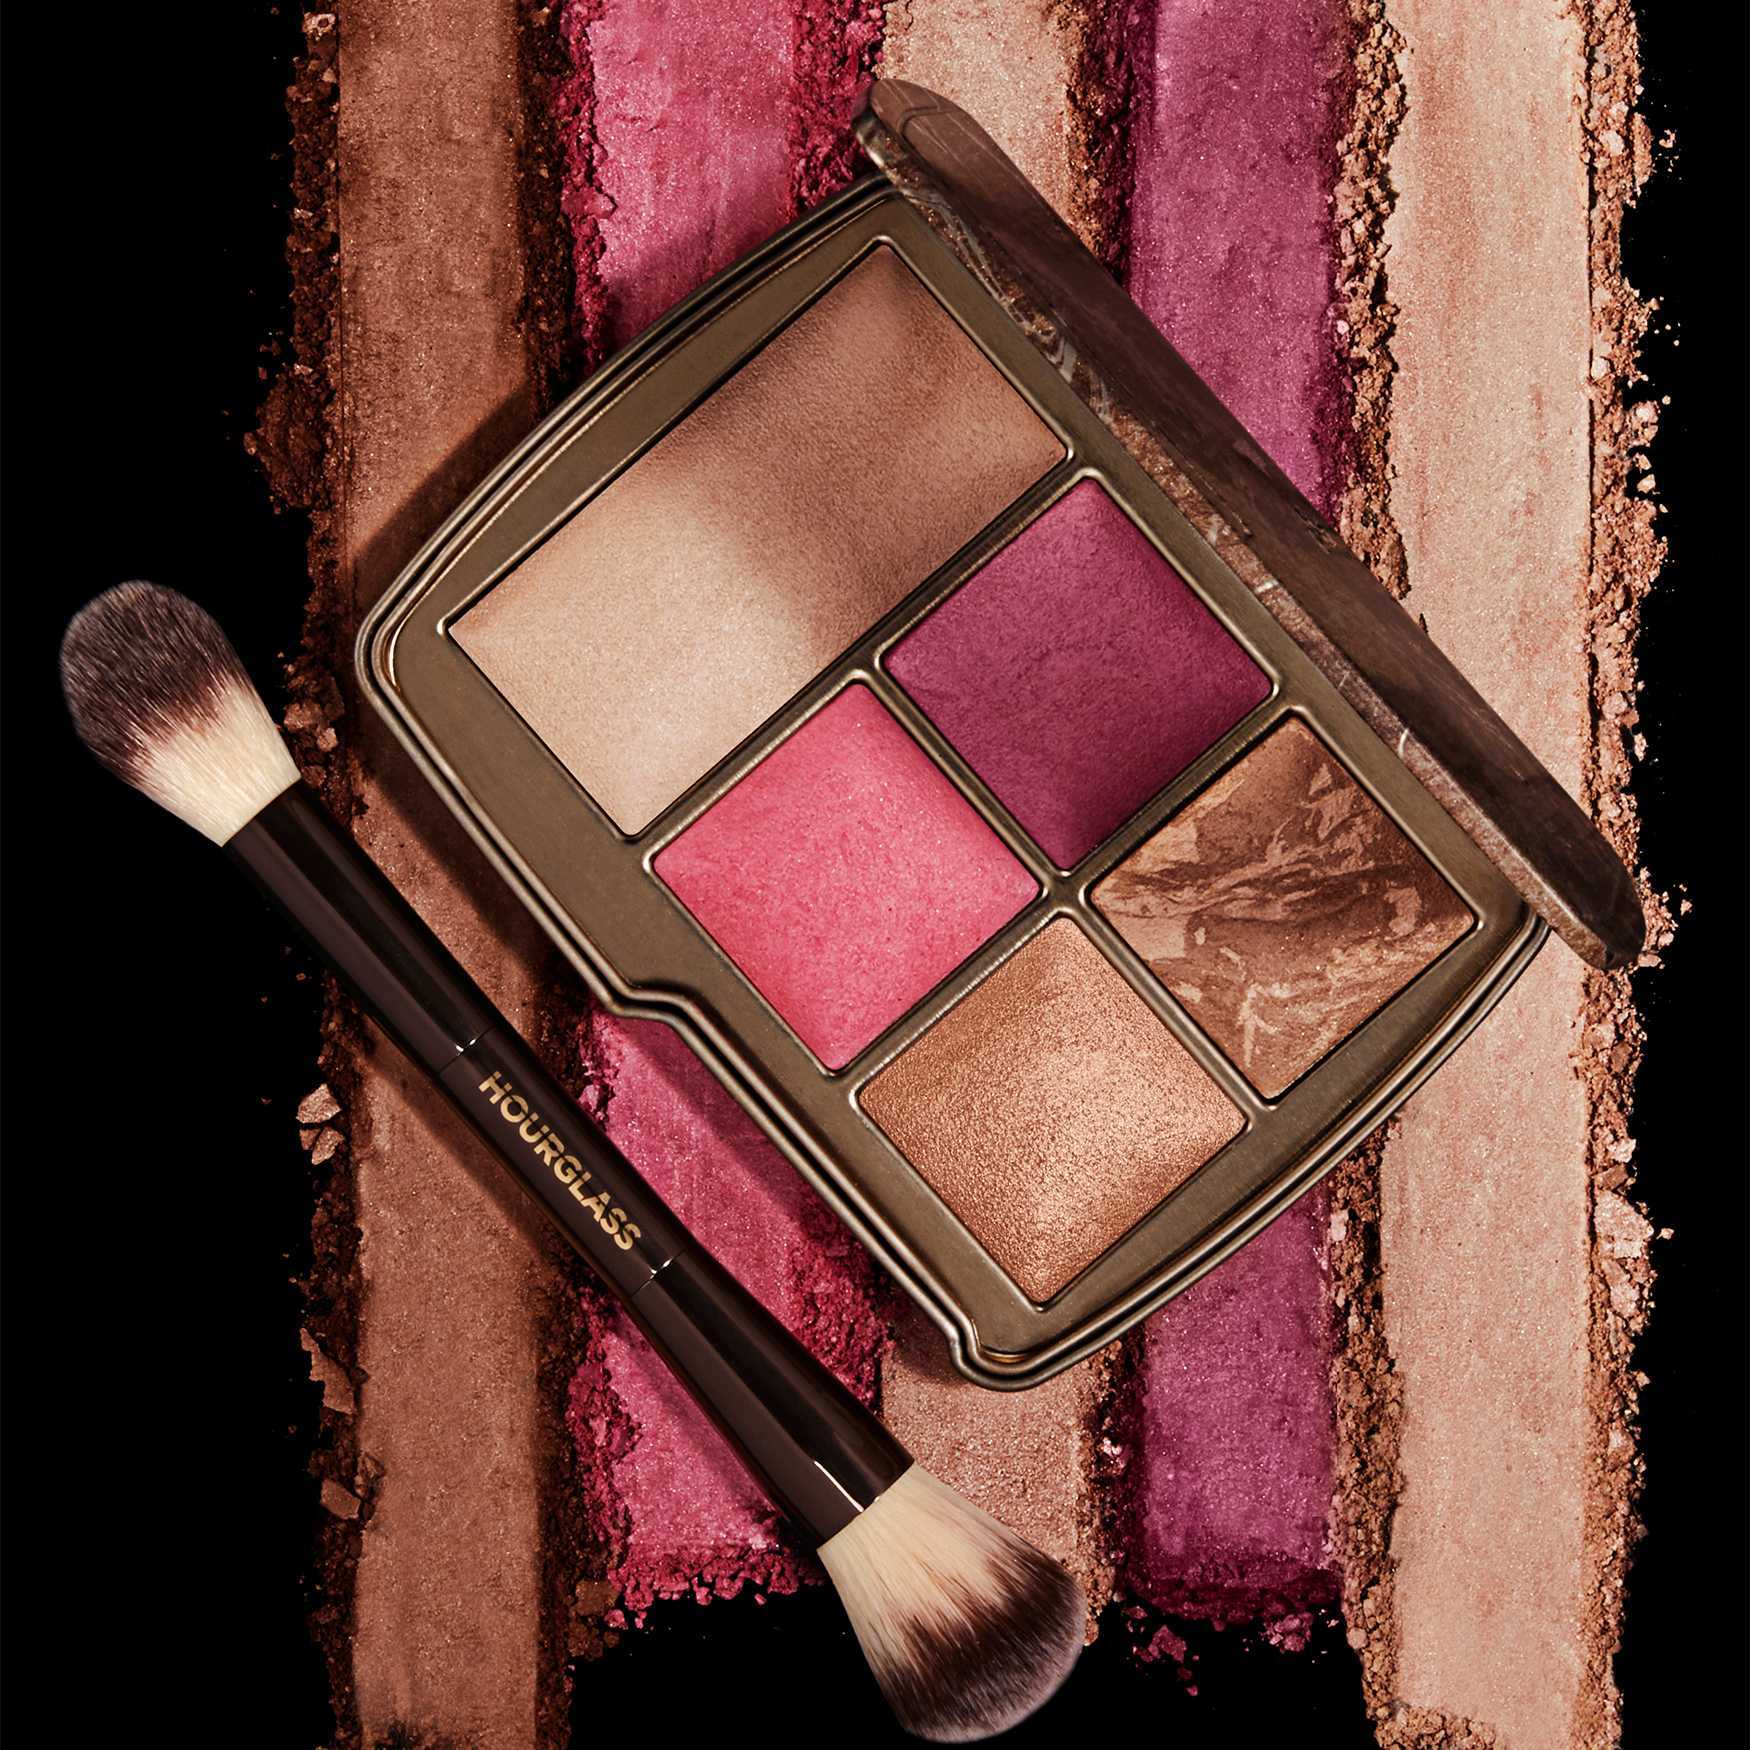 Hourglass ambient lighting palette